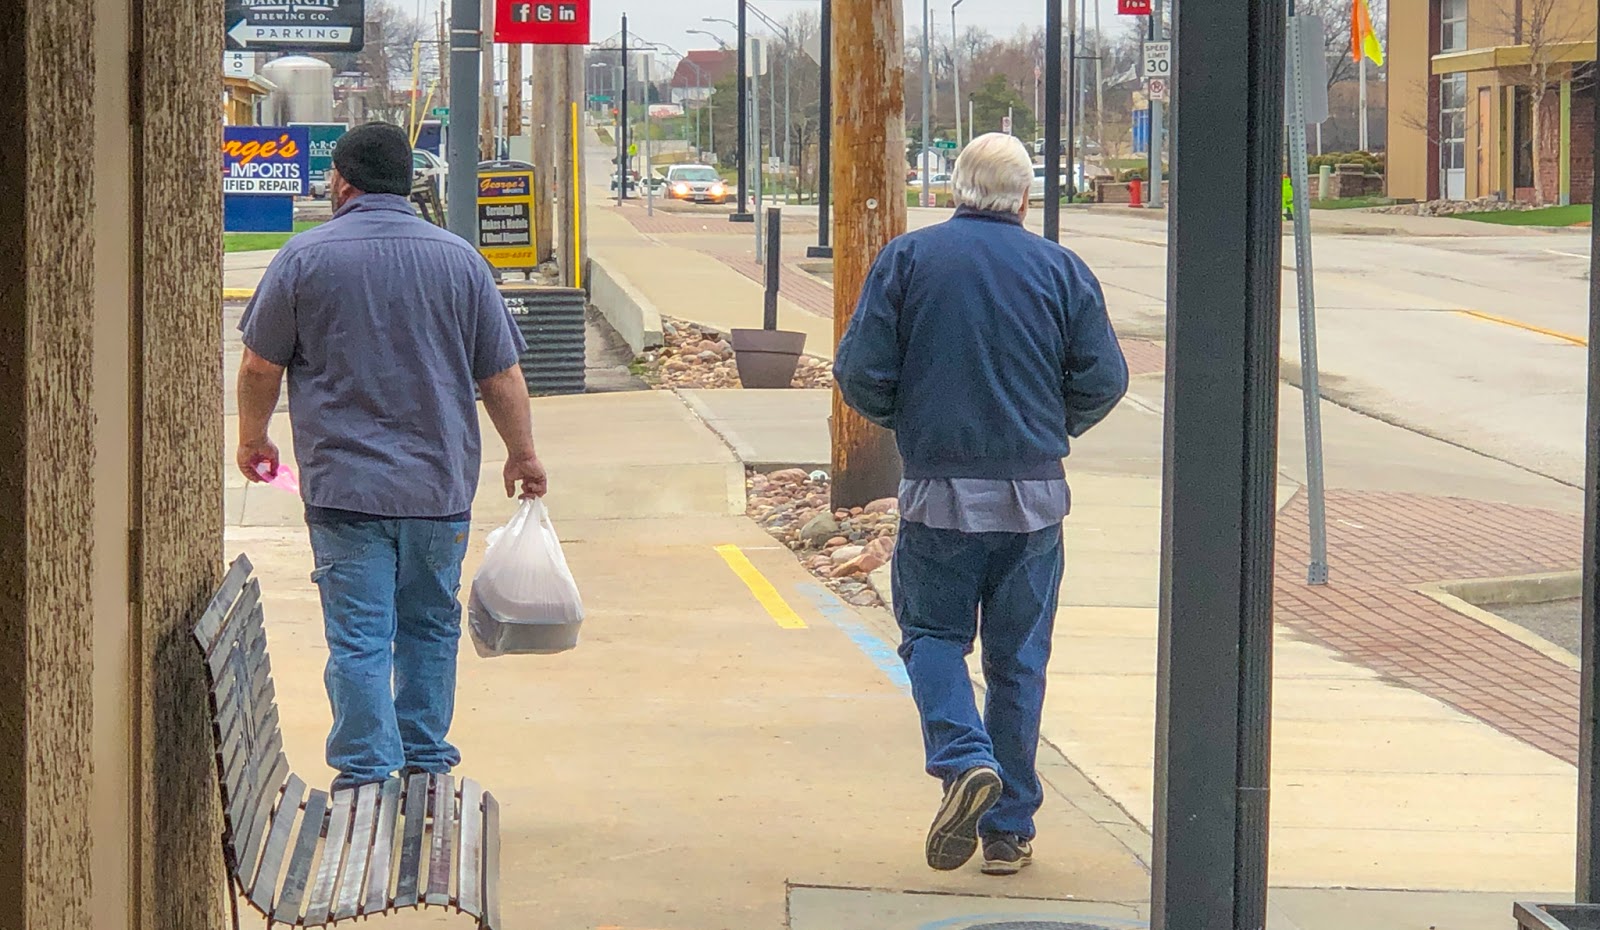 shoppers in martin city mo